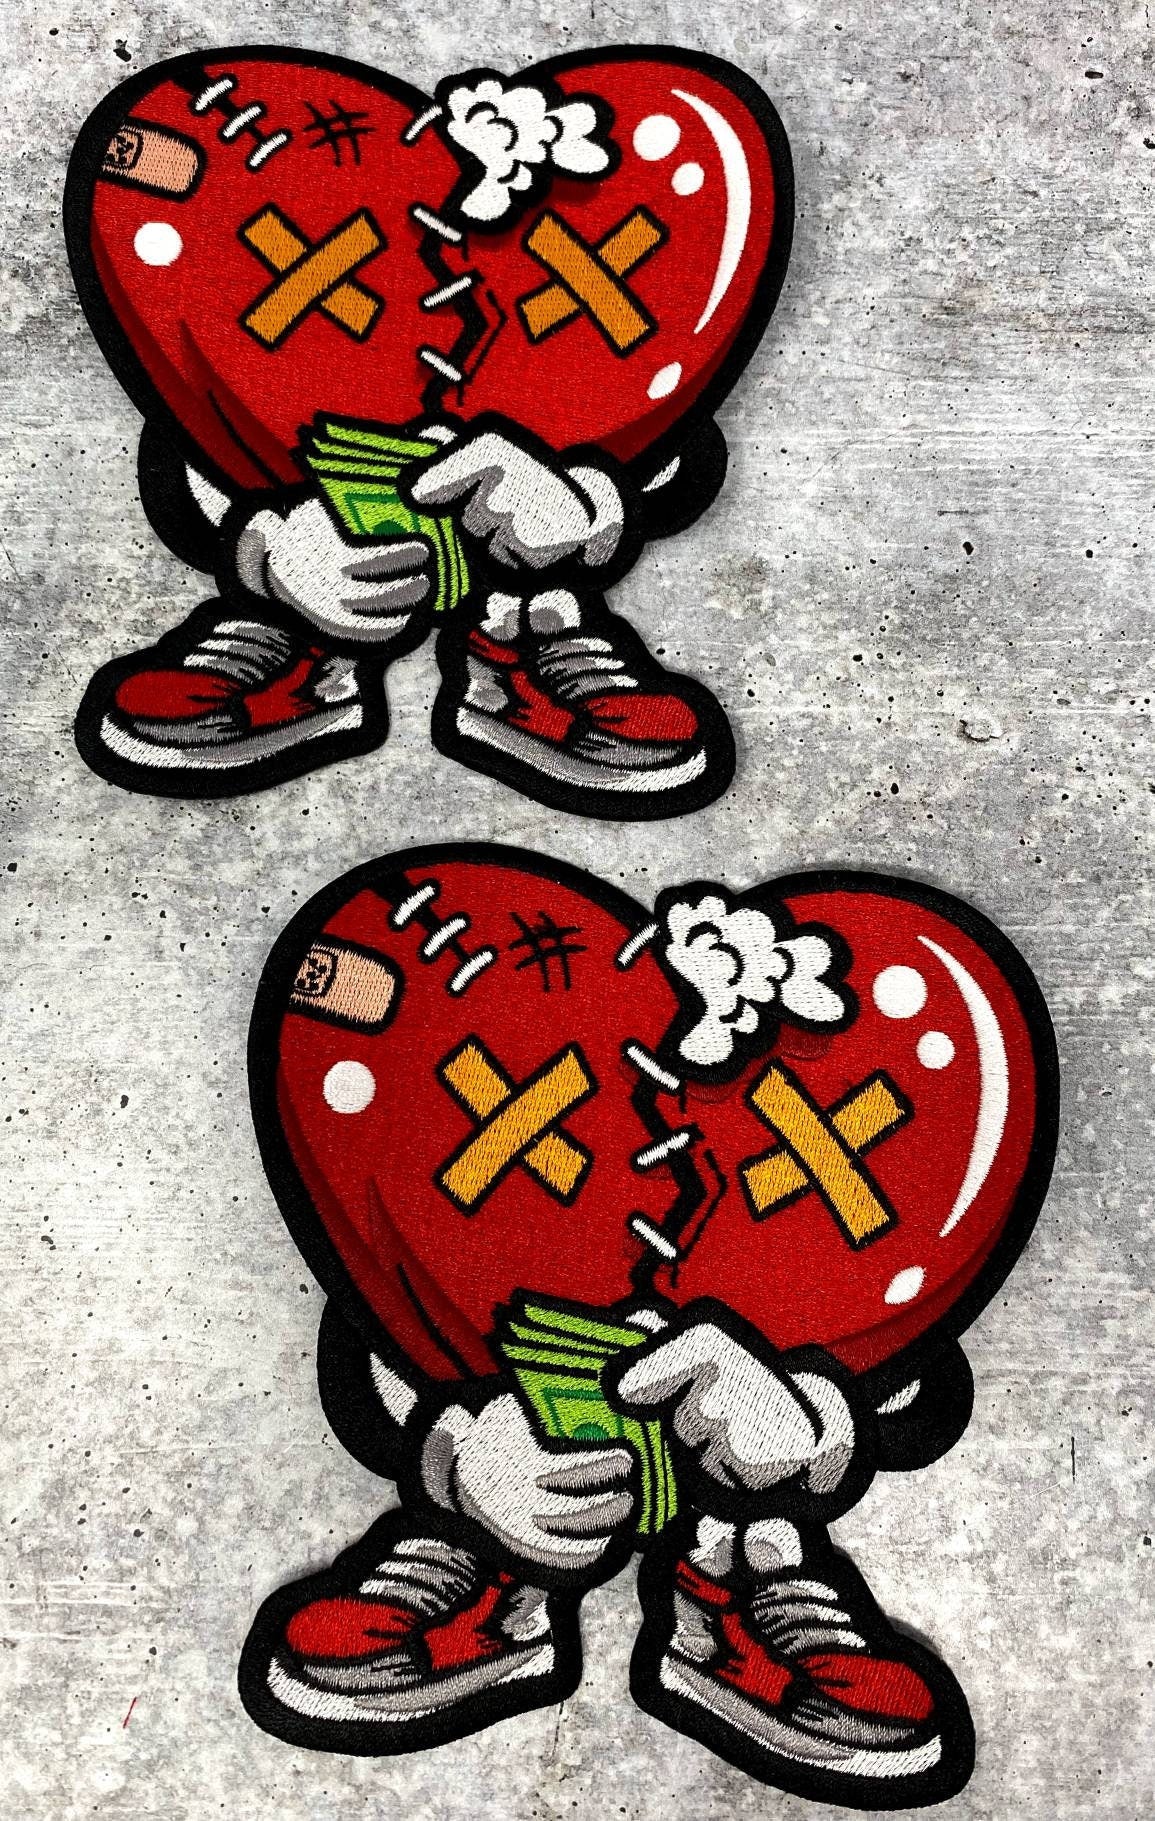 New: 1-pc "Broken Hearted But, Still Hustlin" 100% Embroidered Heart, Iron on Patch, DIY Applique, Large Patch, Size 6"x5", Jacket Patch